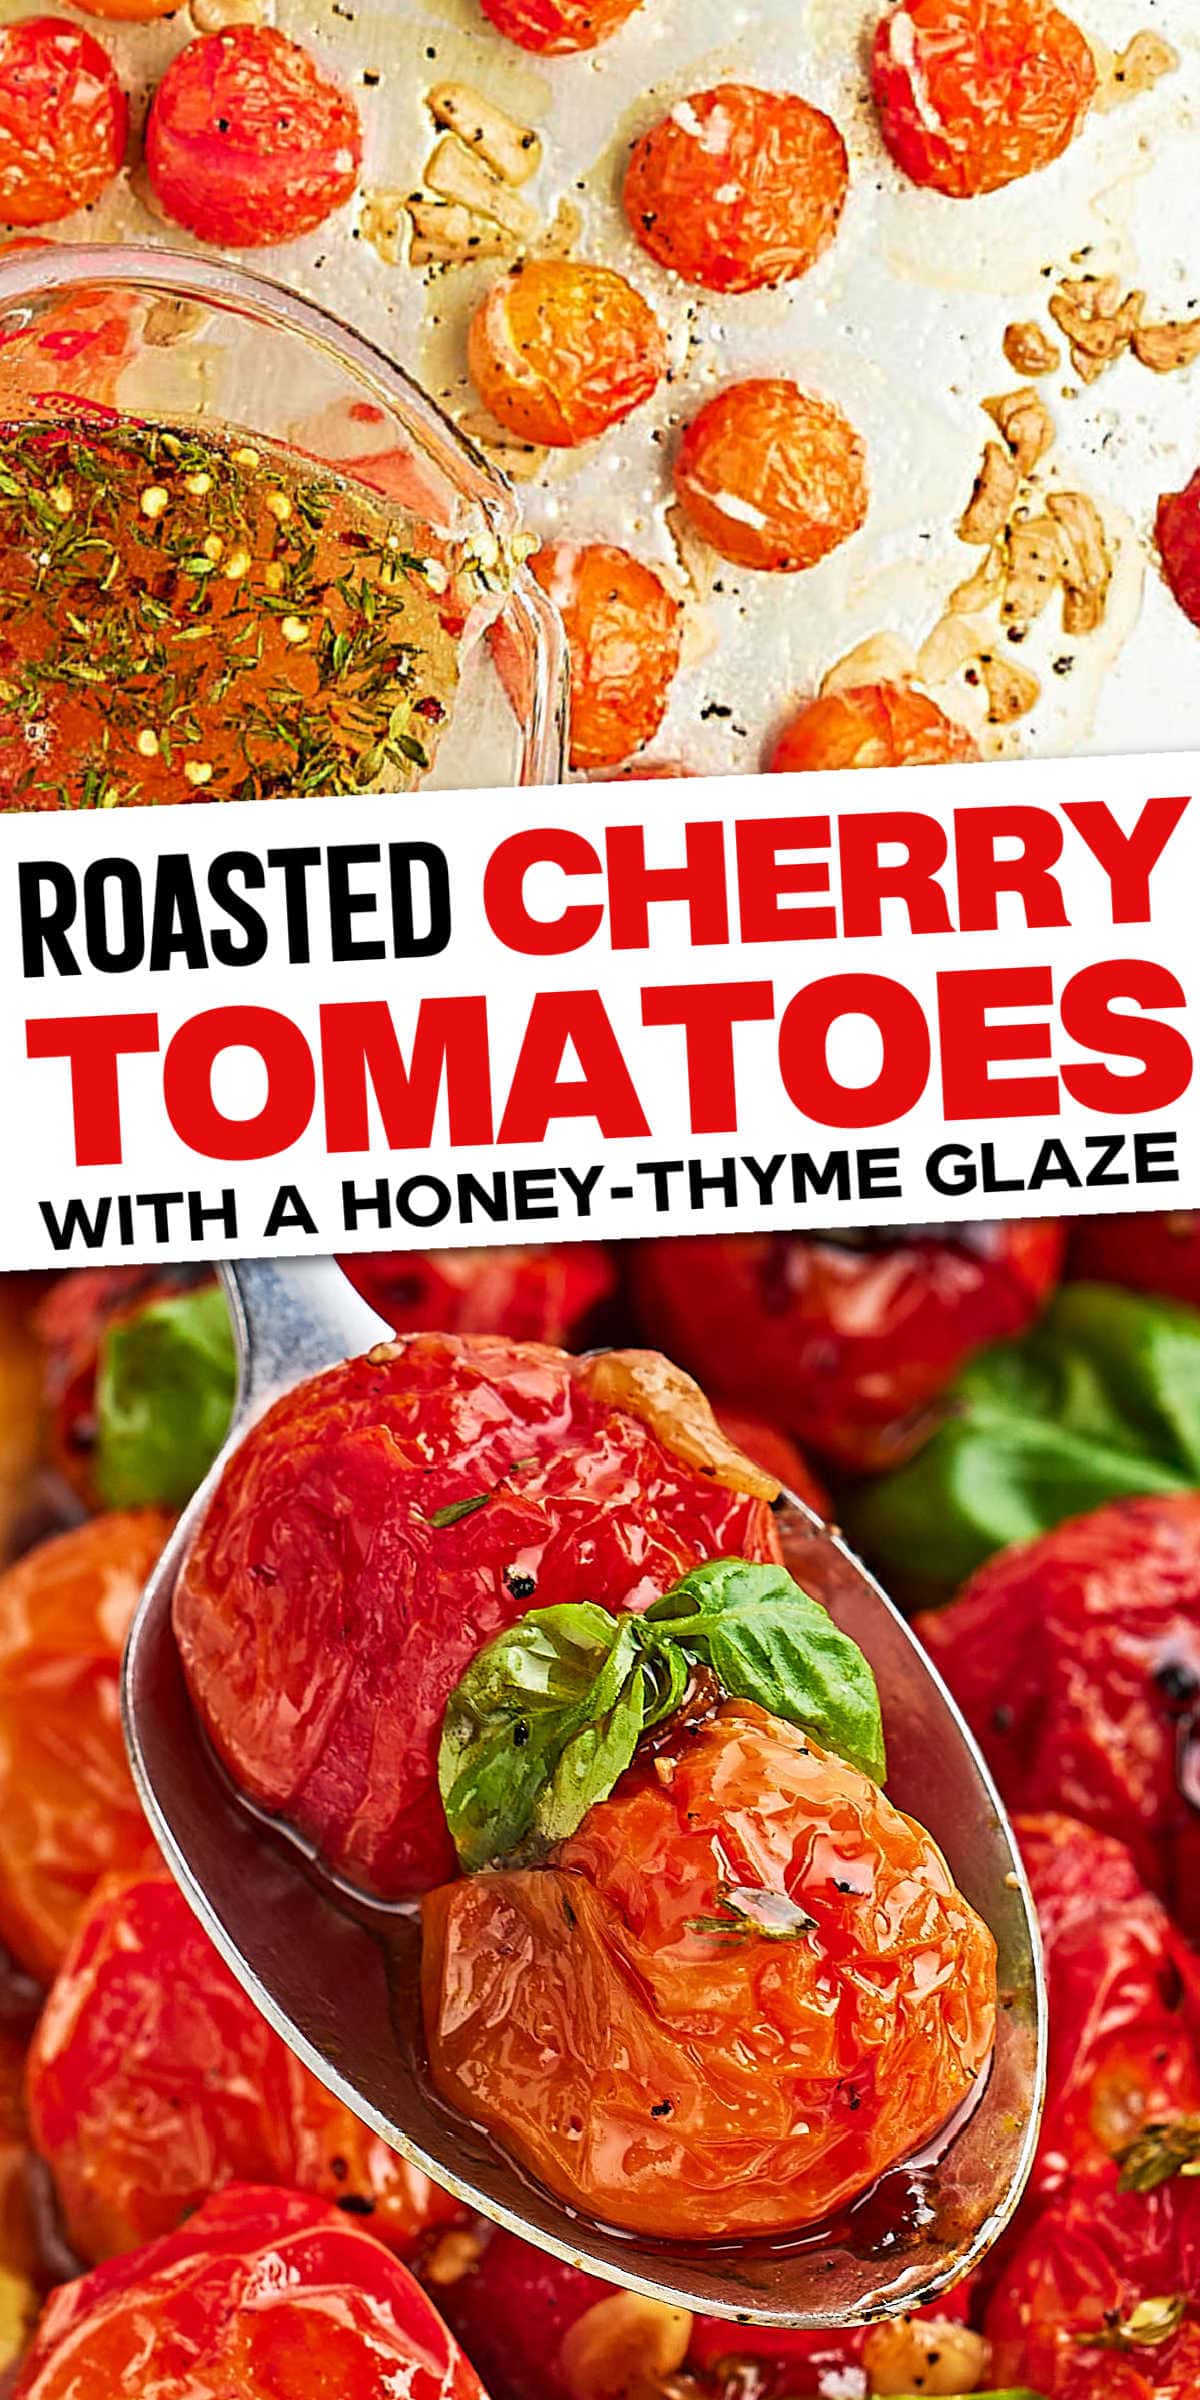 Looking for a tasty and simple recipe? Try our Roasted Cherry Tomatoes with Honey-Thyme Glaze - it's a perfect blend of sweet, savory, and a little bit of tang! #cheerfulcook #roastedcherrytomatoes #roastedvegetables #EasyRecipes #TomatoRecipes via @cheerfulcook